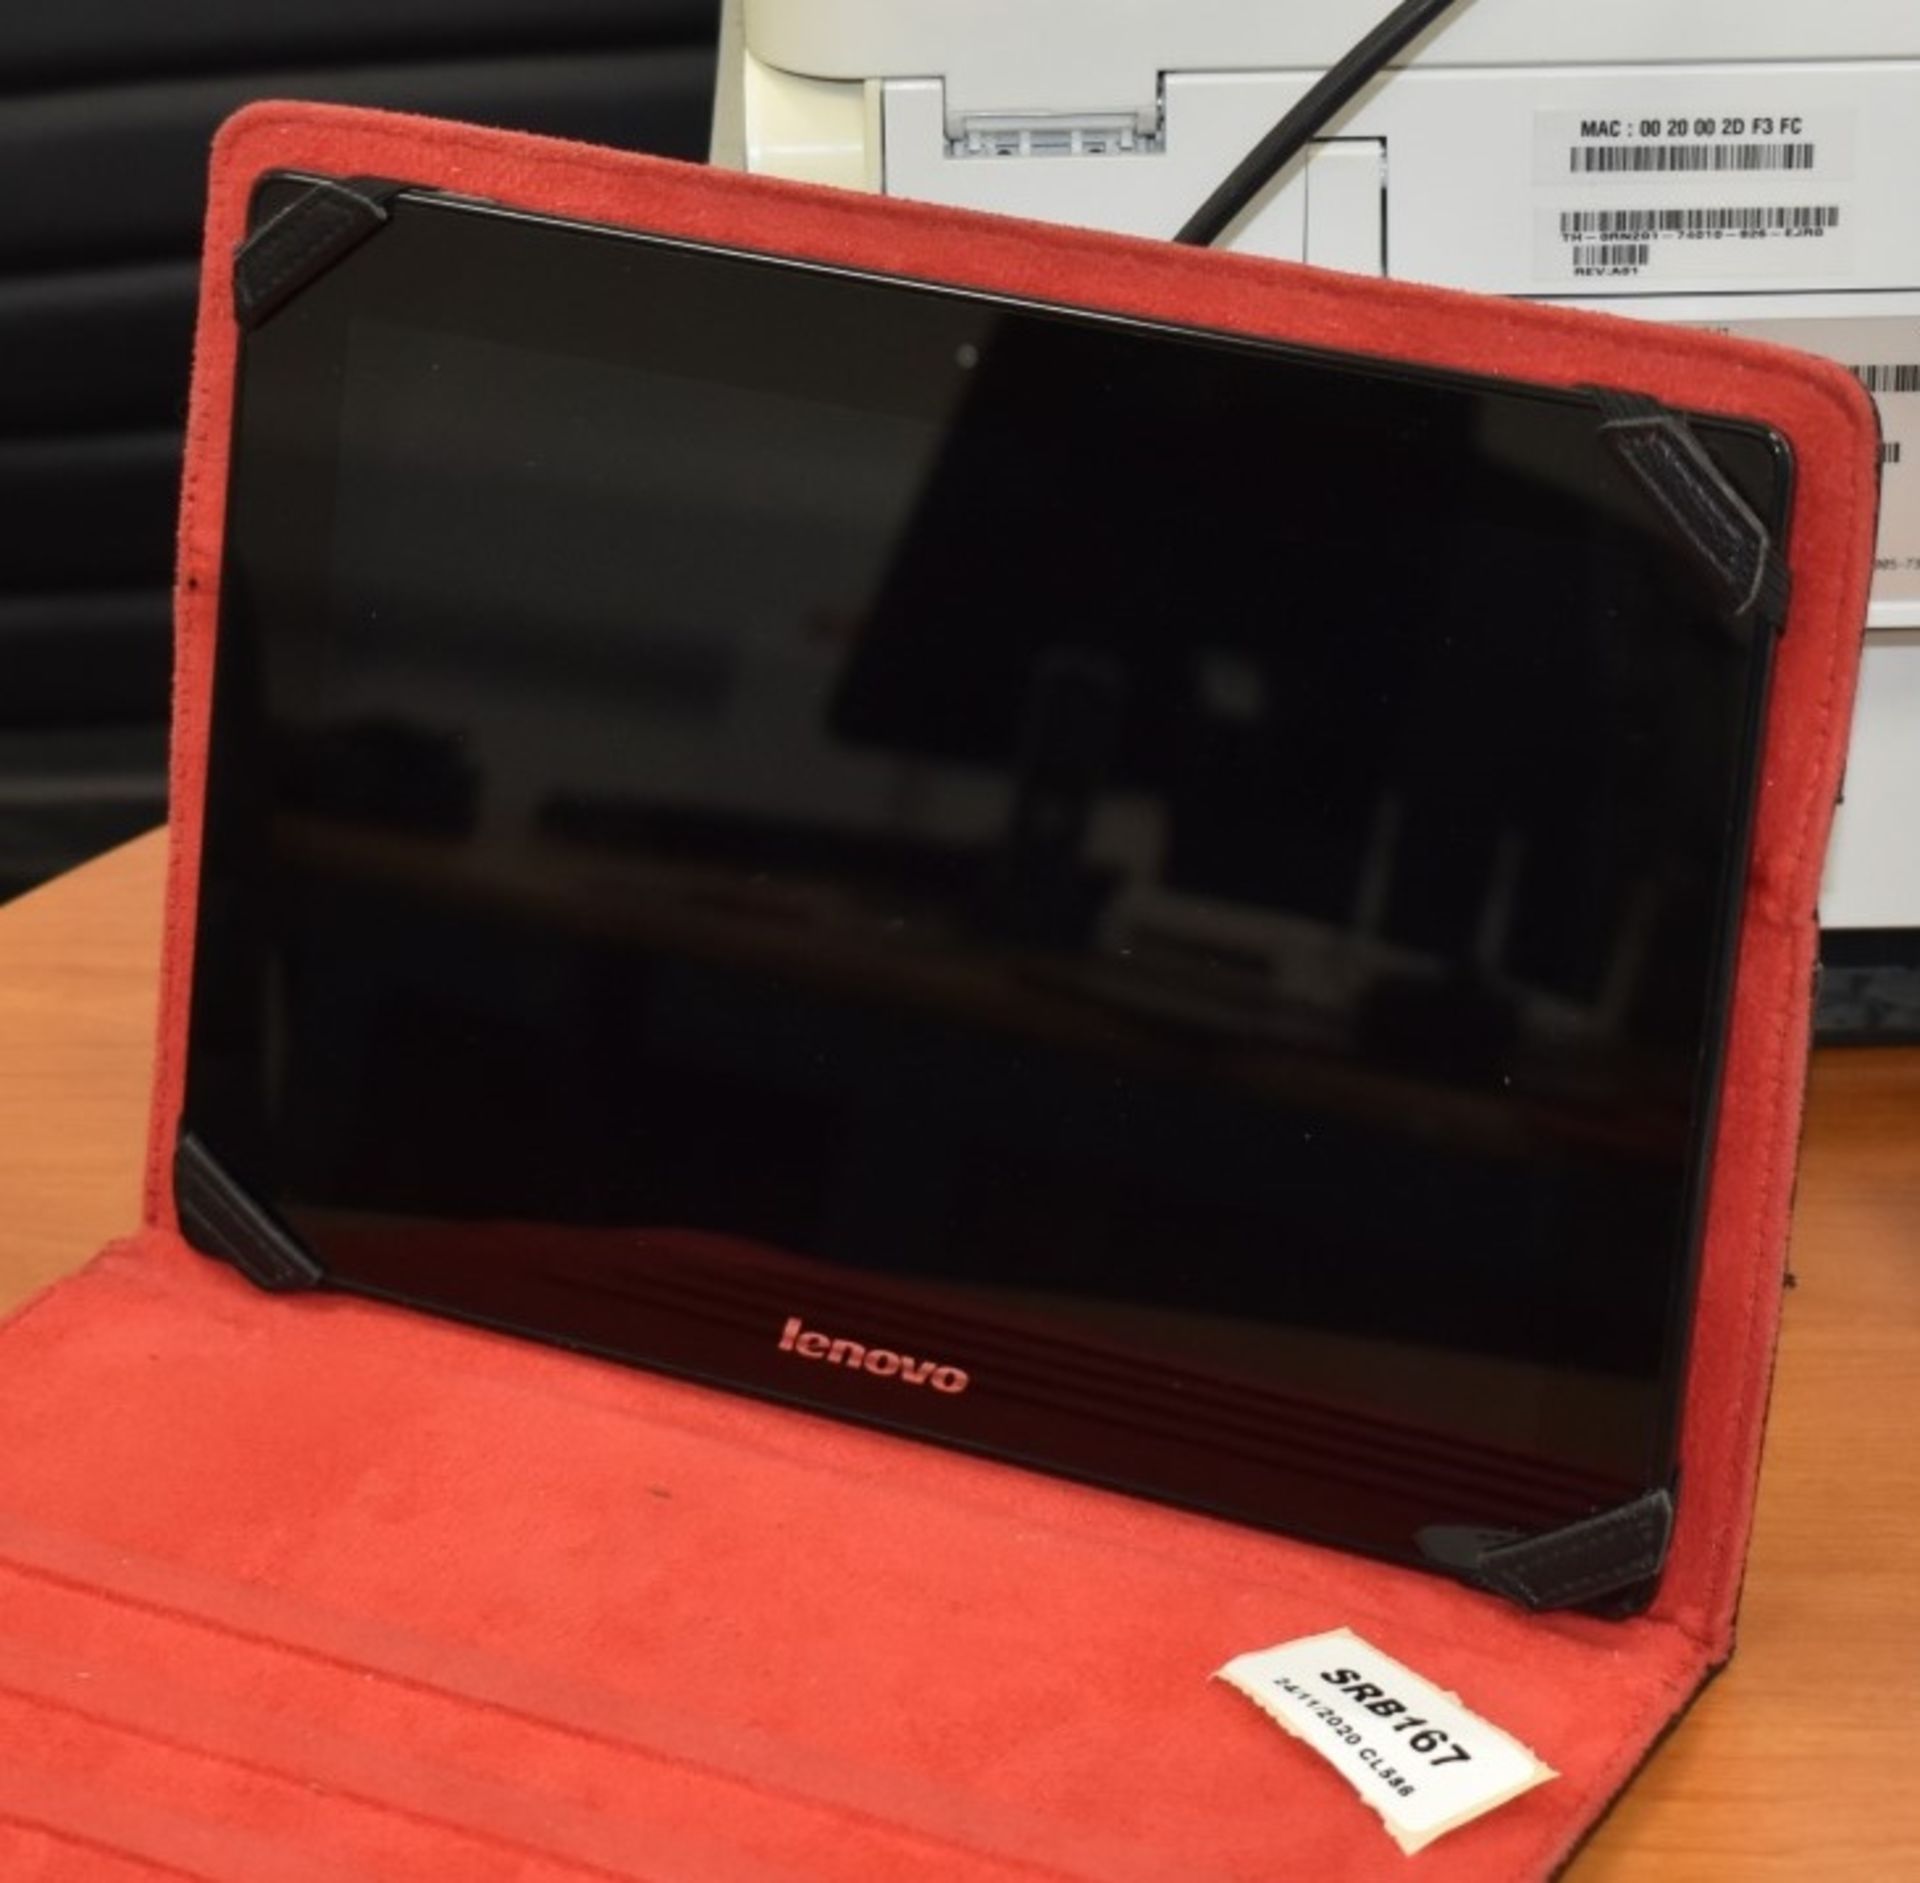 1 x Lenovo S6000 10.1inch Tablet Featuring a Quad Core 1.2GHz Processor, 1GB RAM, 32GB Storage - Image 3 of 8